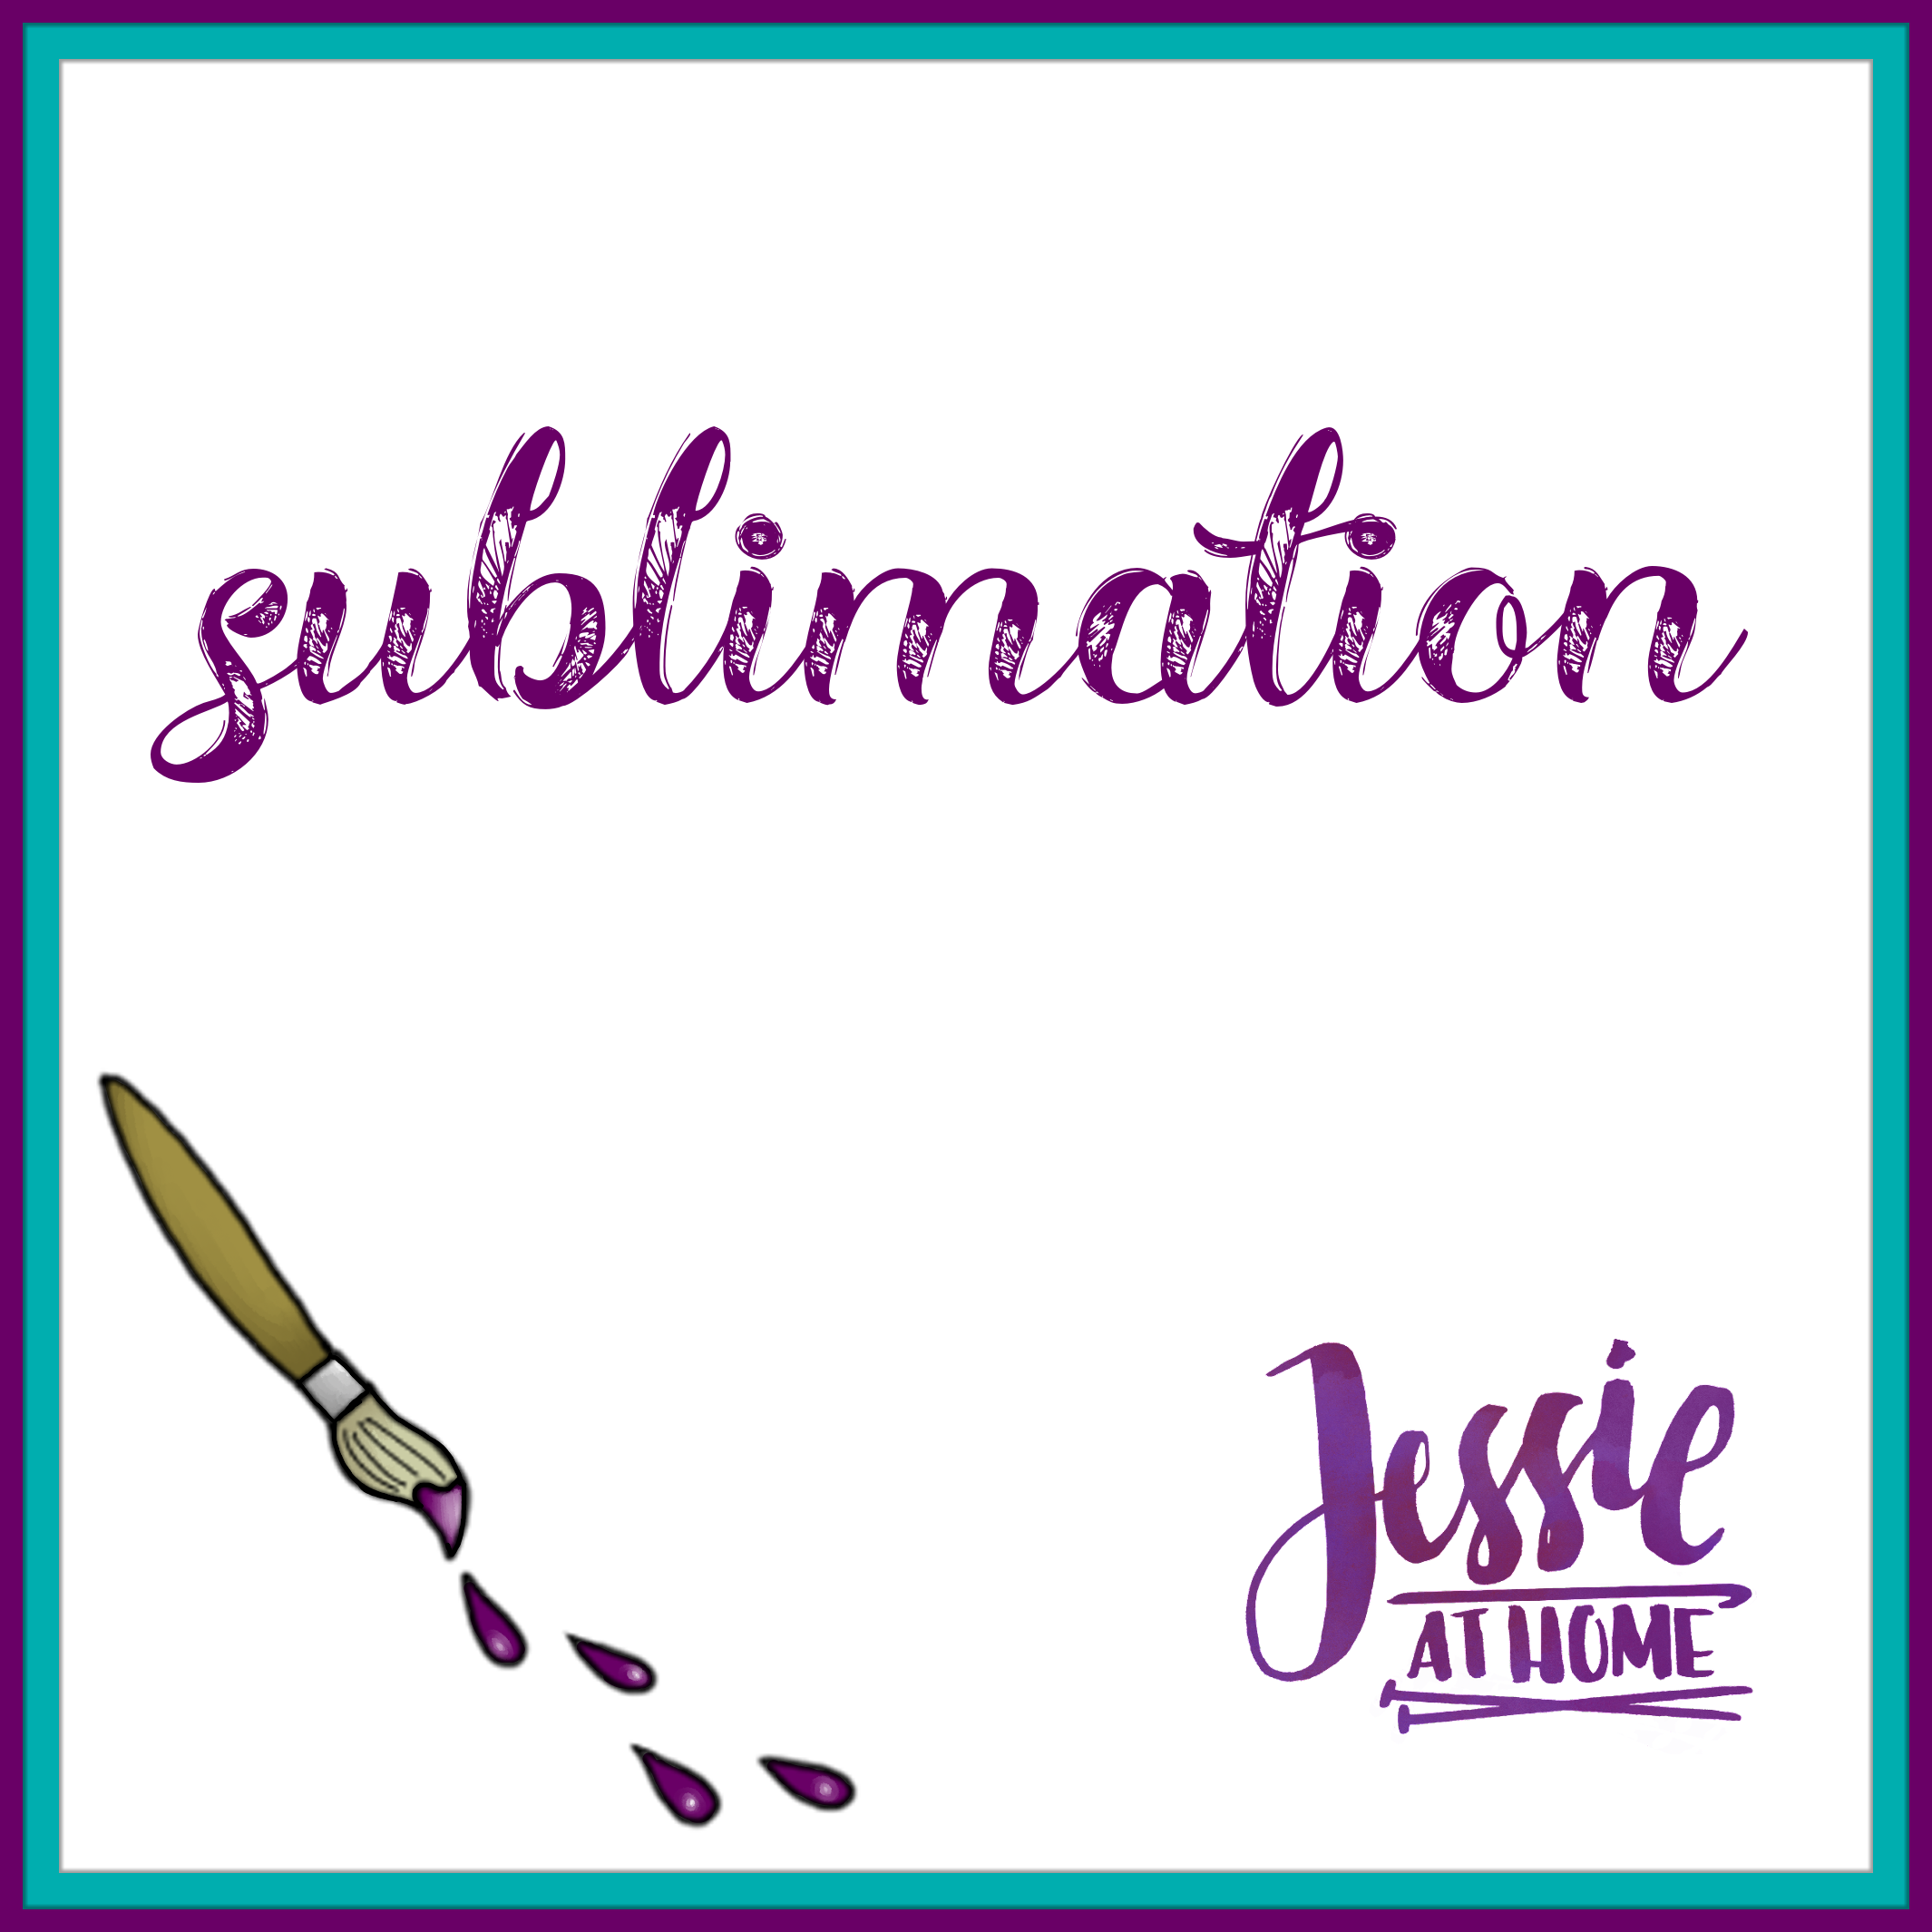 Sublimation Menu on Jessie At Home